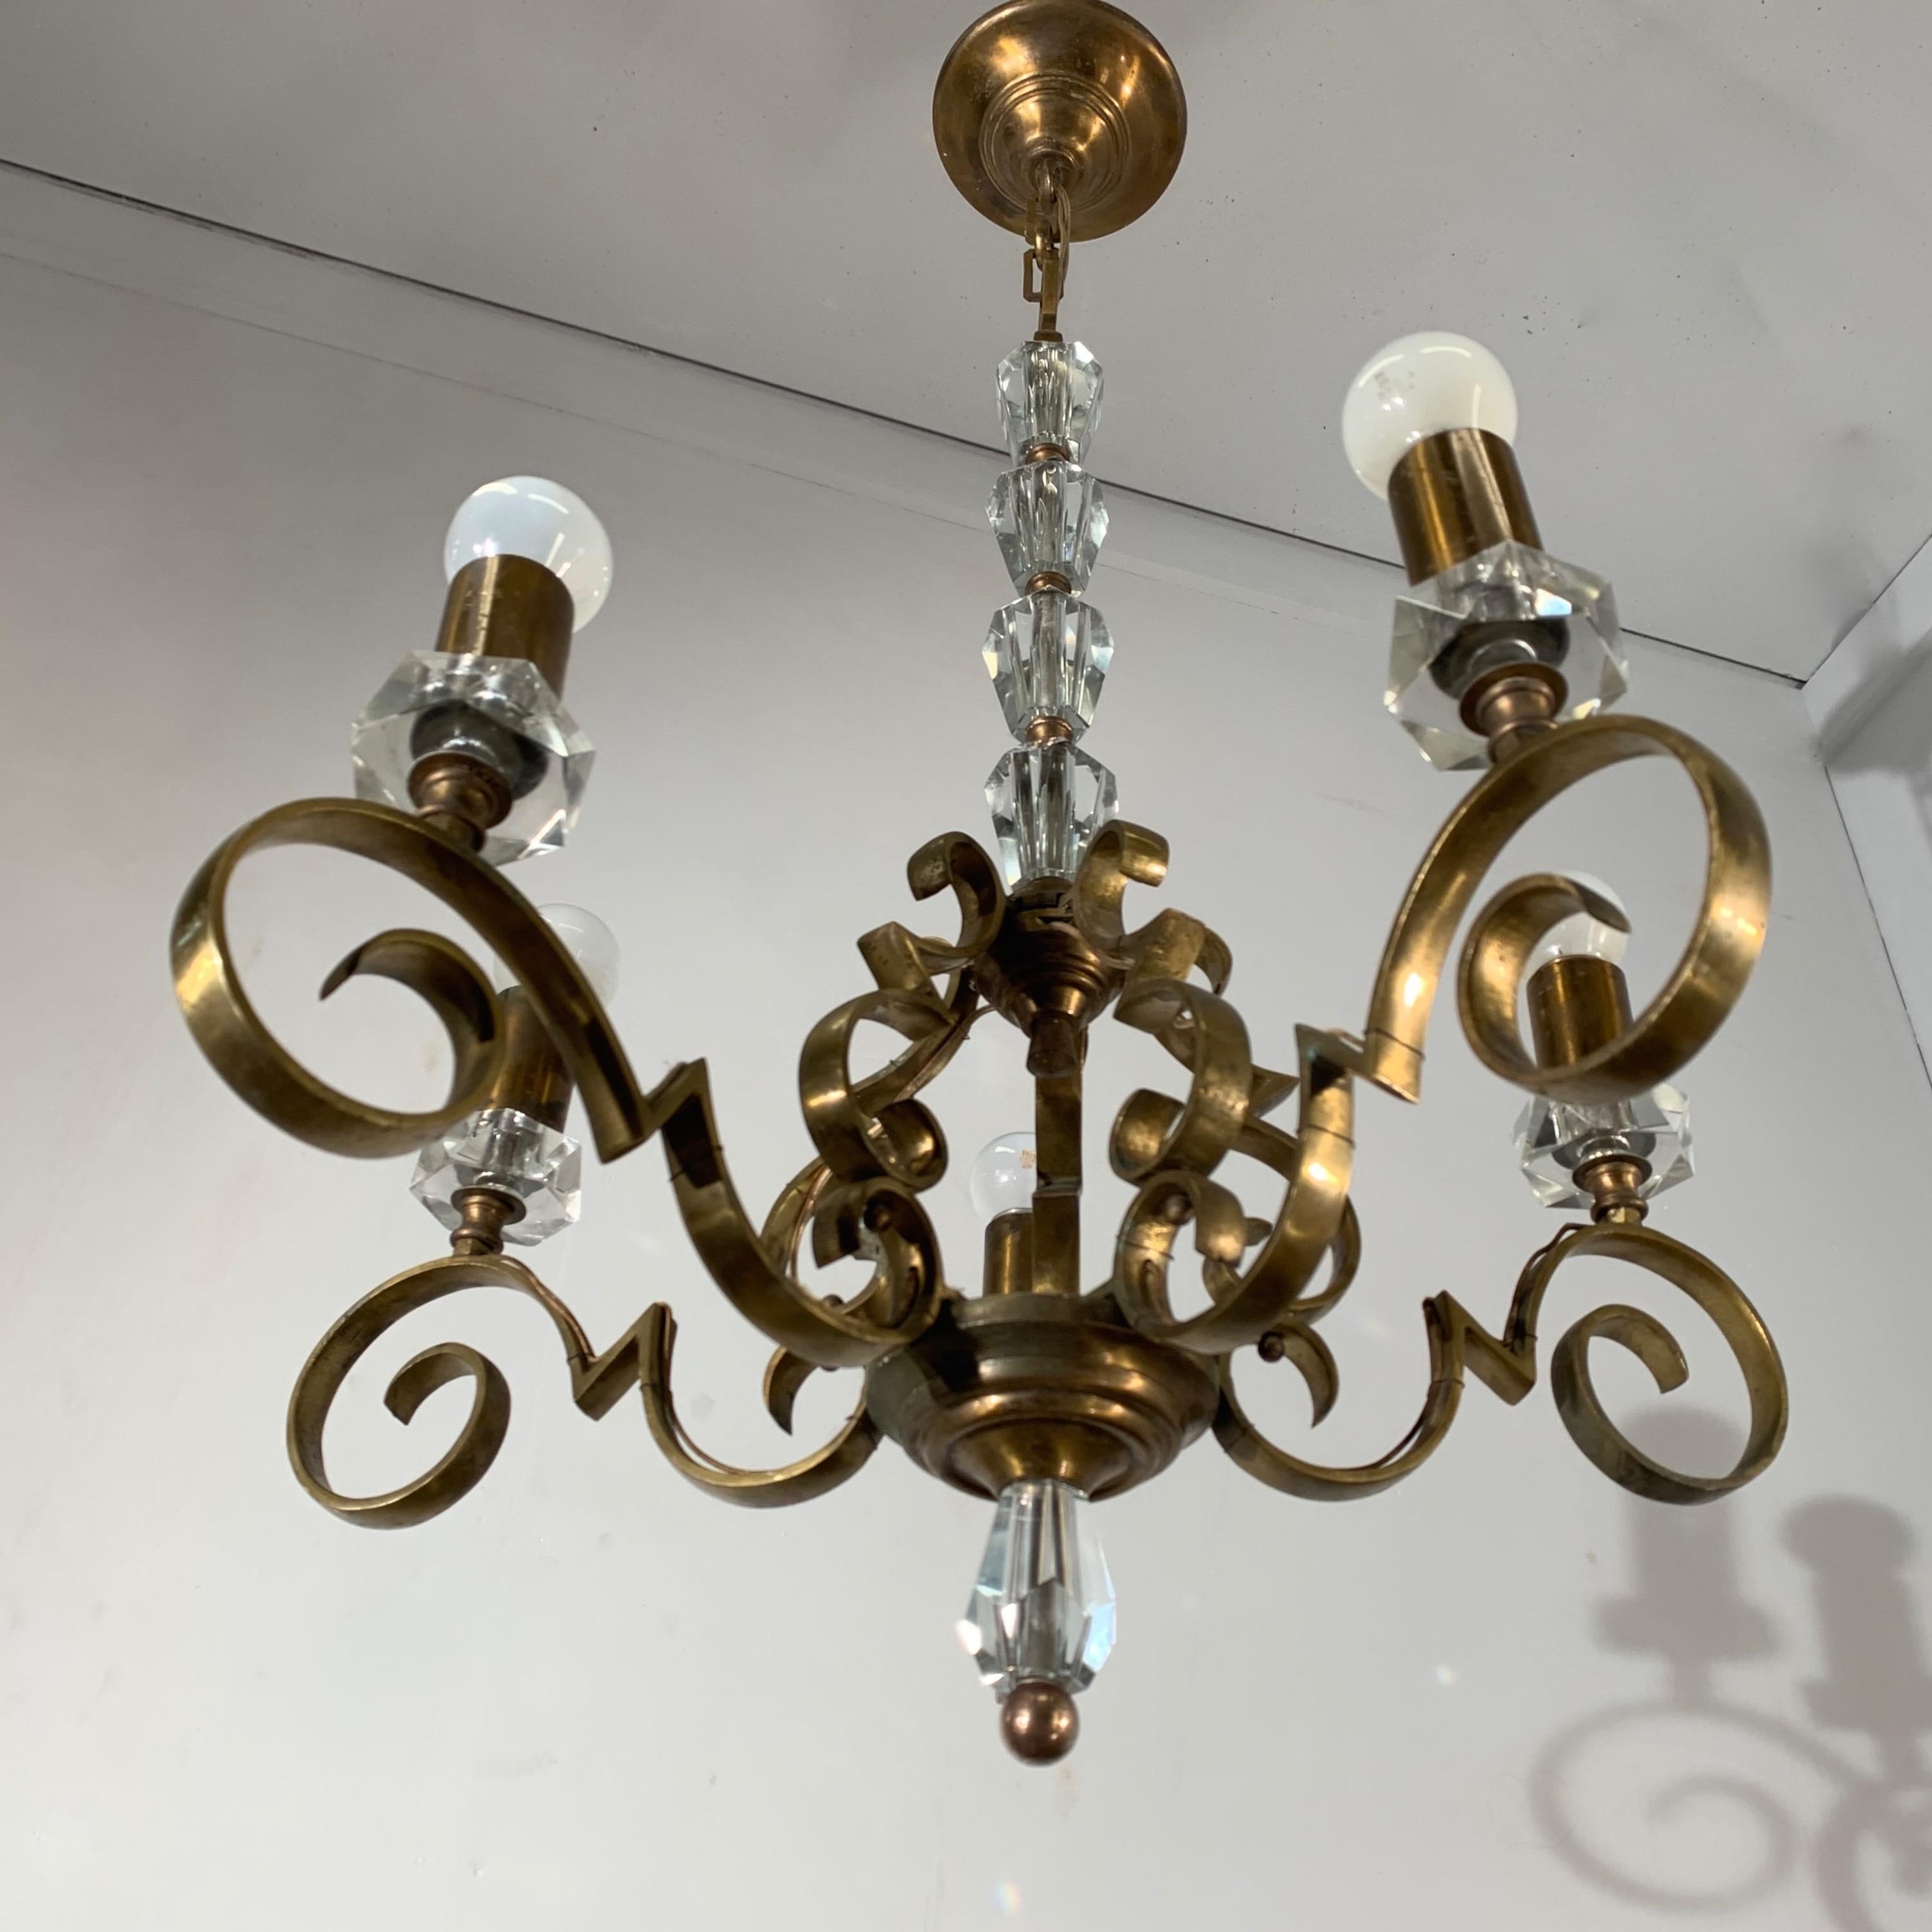 French Rare and Handcrafted Jule Leleu Style 5 Light Bronze & Glass Art Deco Chandelier For Sale